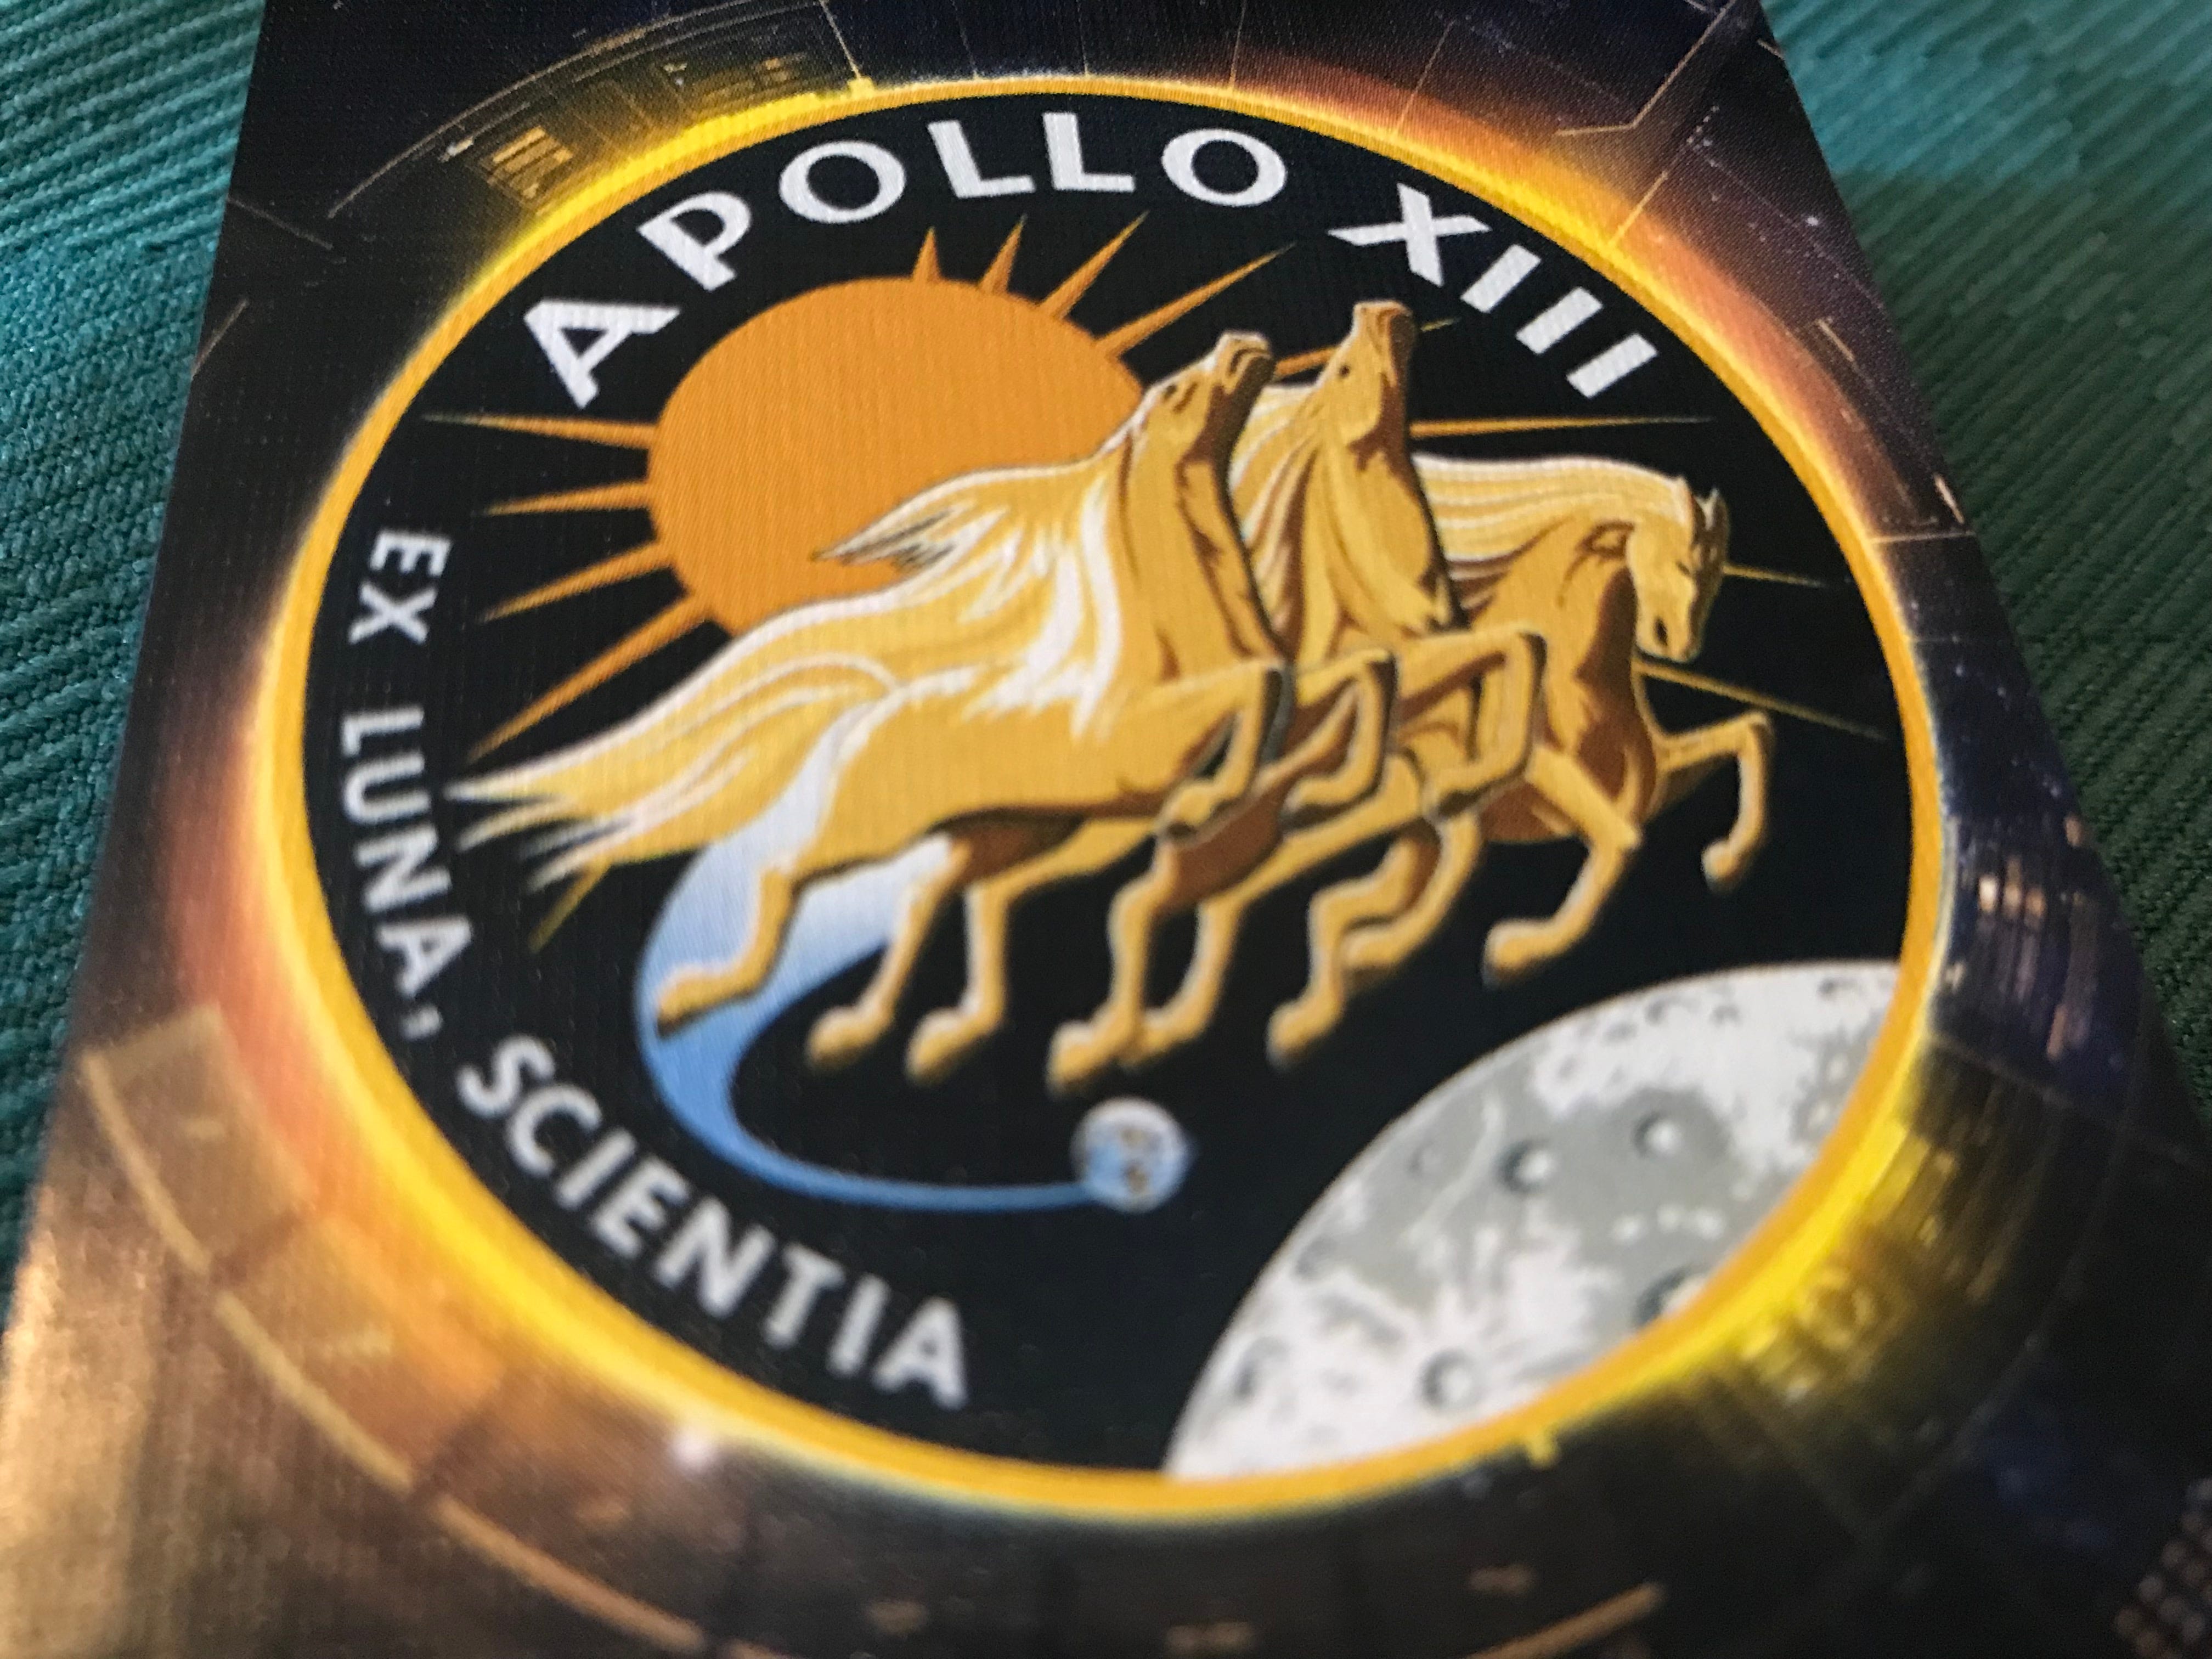 Apollo Xiii The Board Game Who Knew Mission Failure Could Be So Much Fun By Martin Gonzalvez Medium - nasa center for exploration roblox